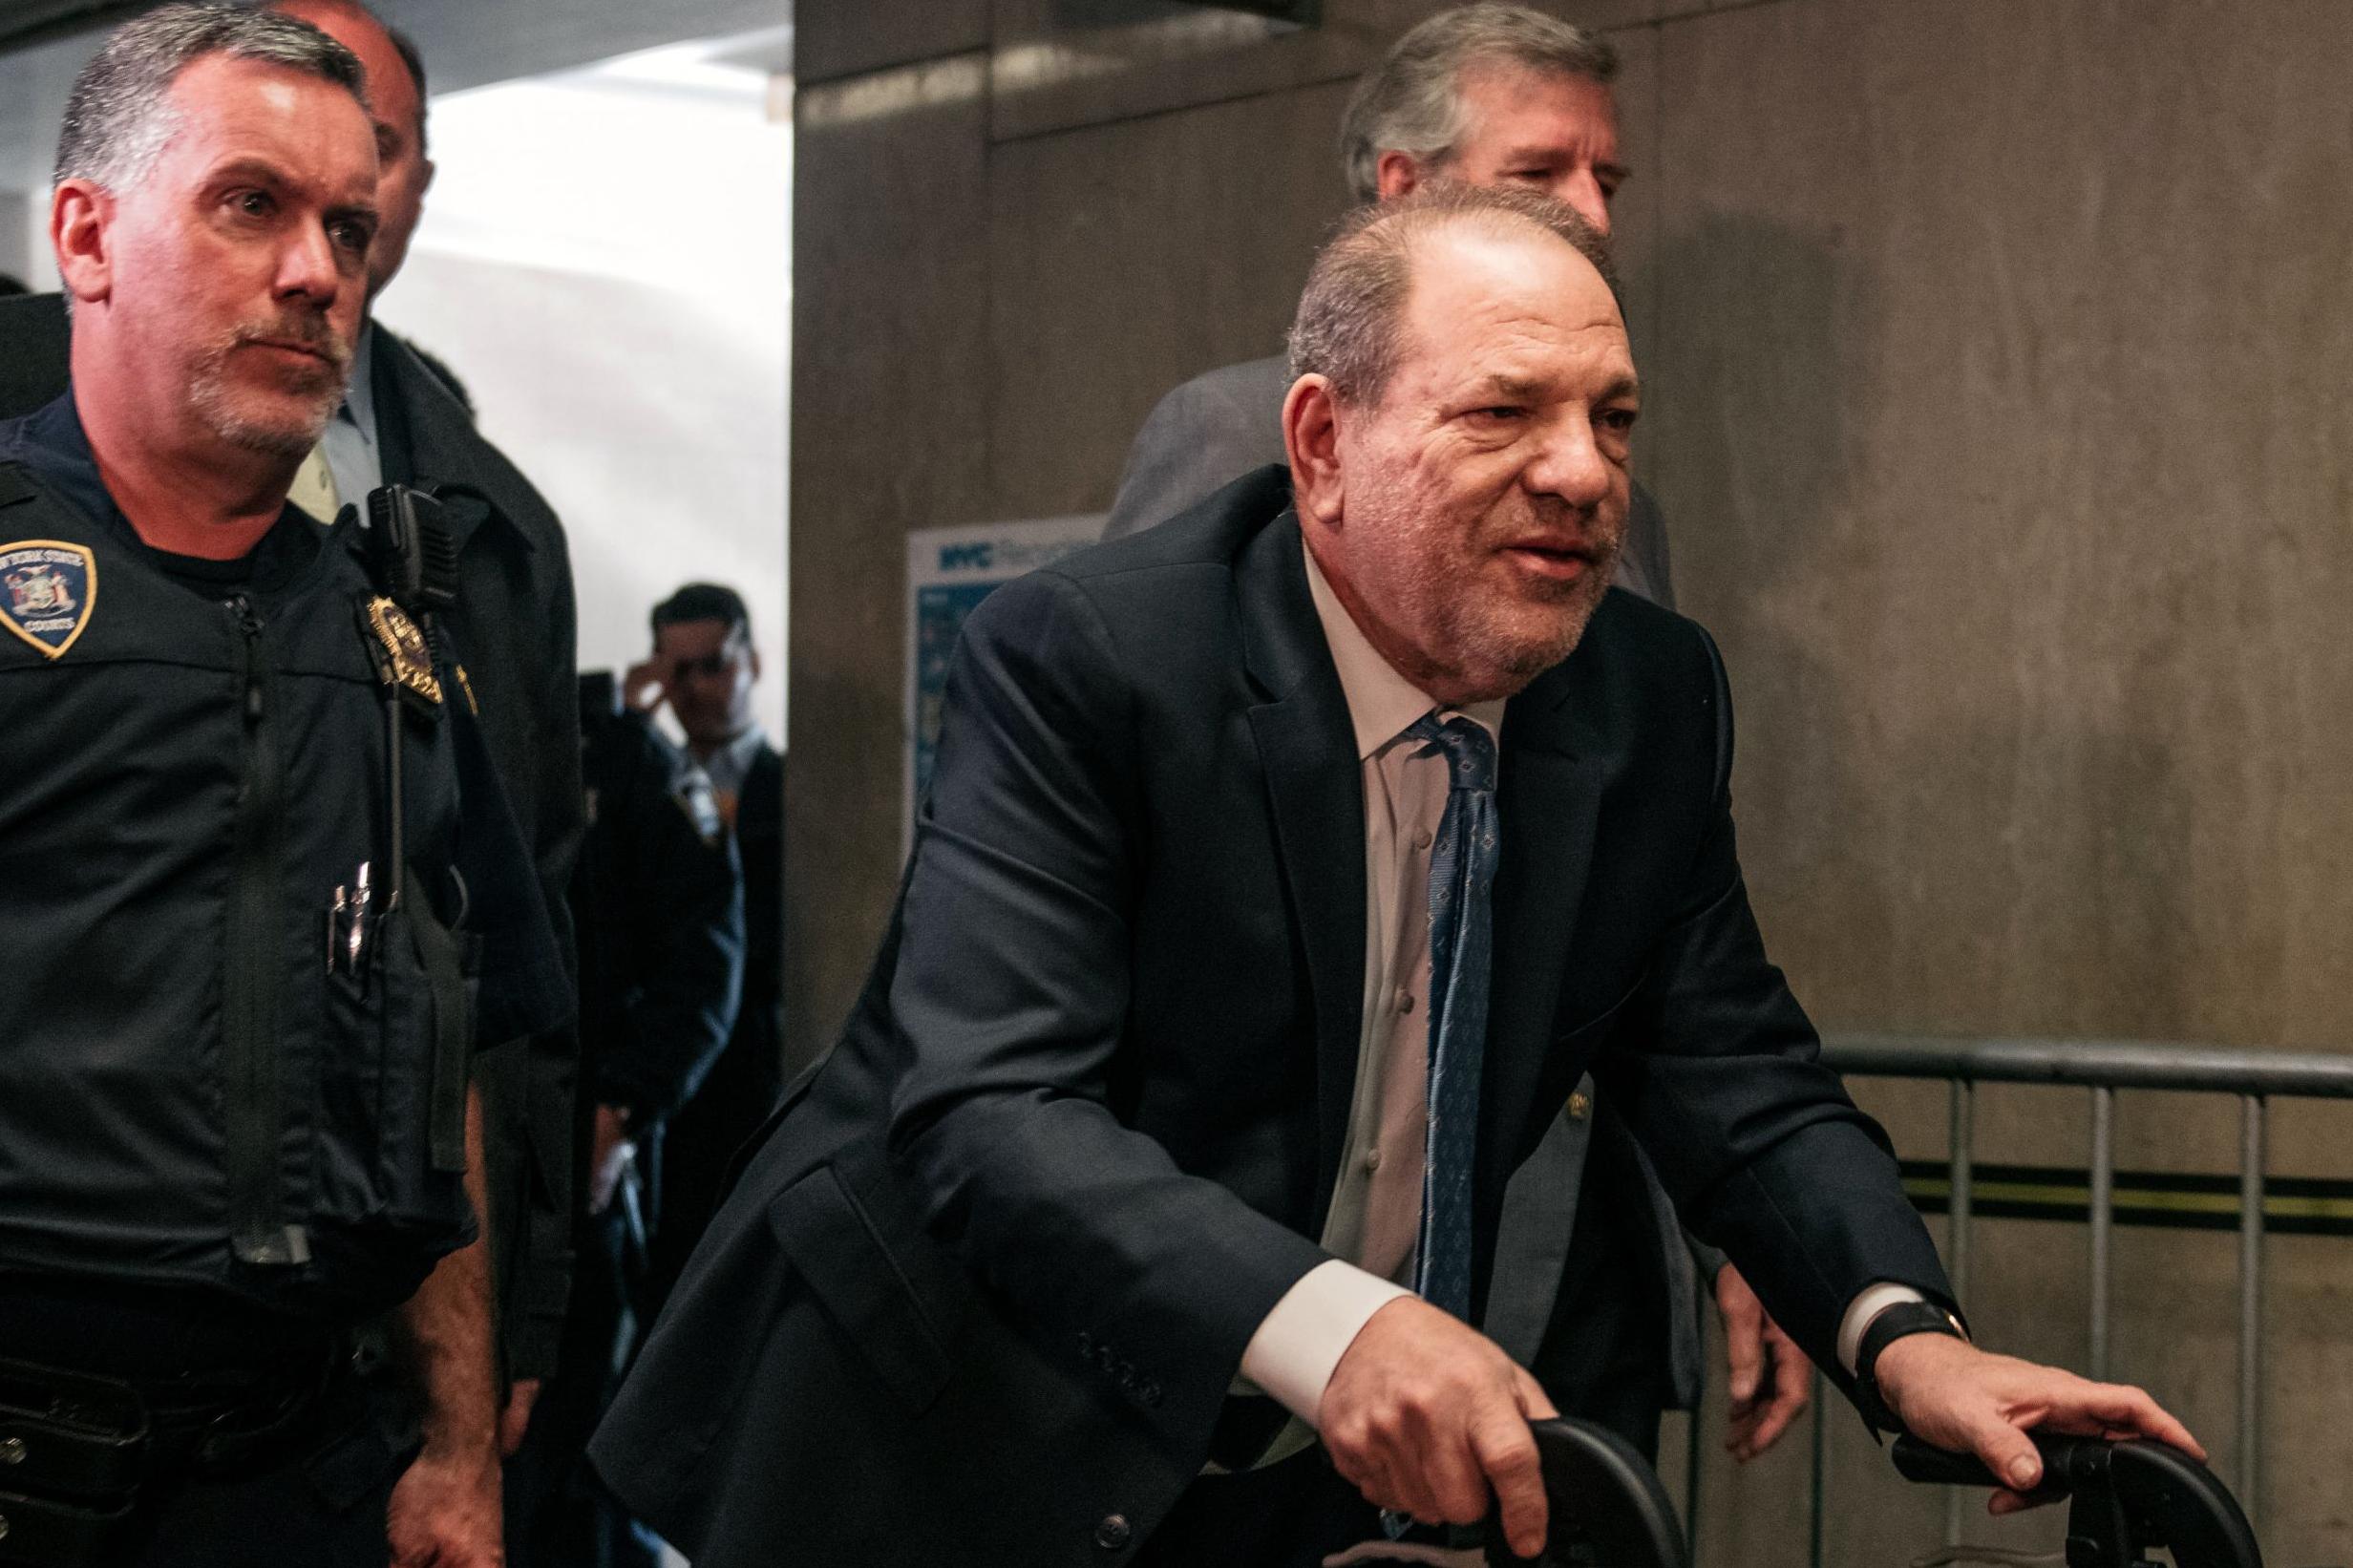 Harvey Weinstein enters a New York City courtroom on 24 on February 2020 in New York City